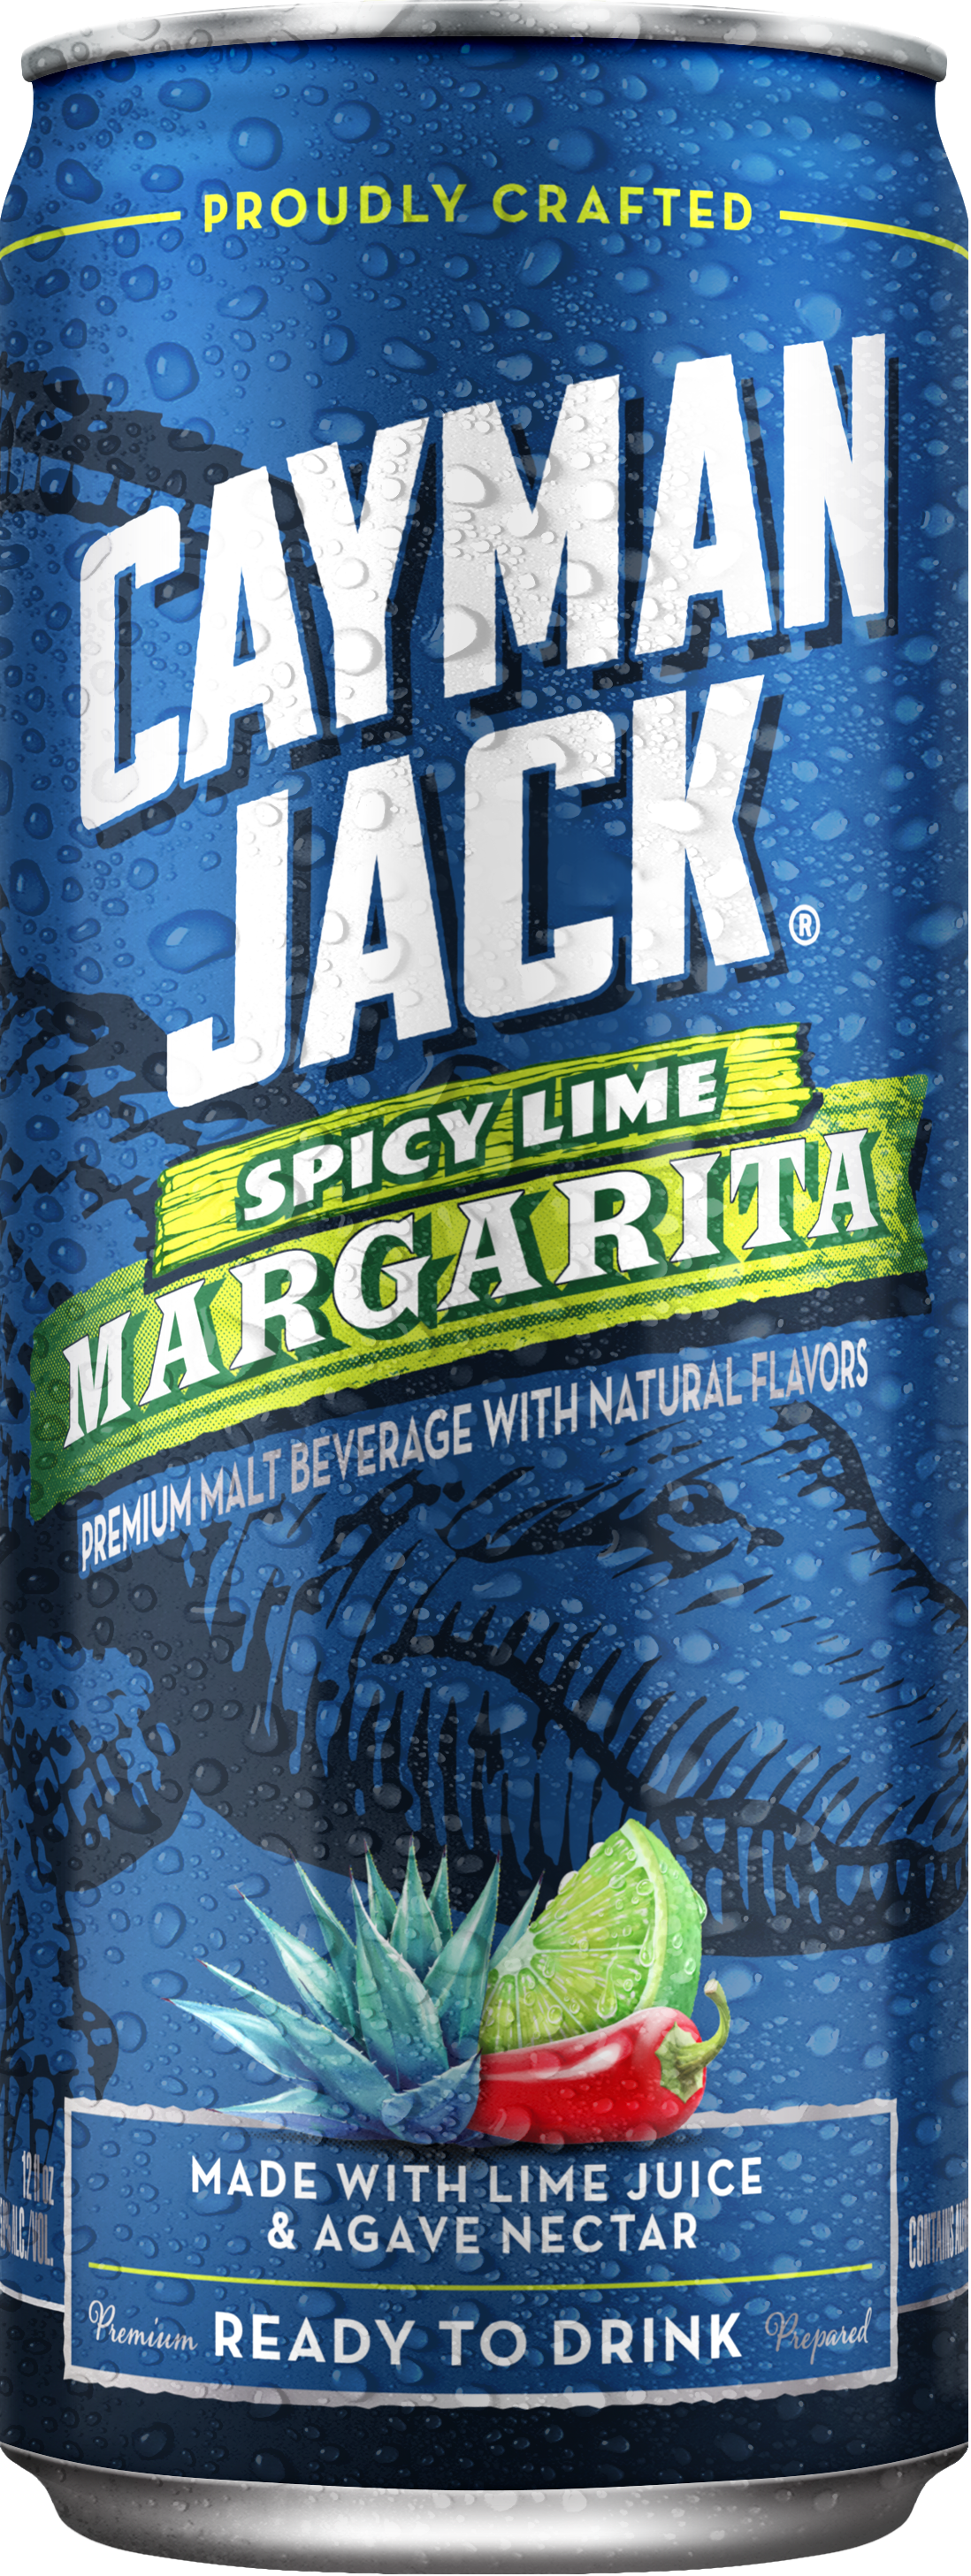 Spicy Lime Margarita